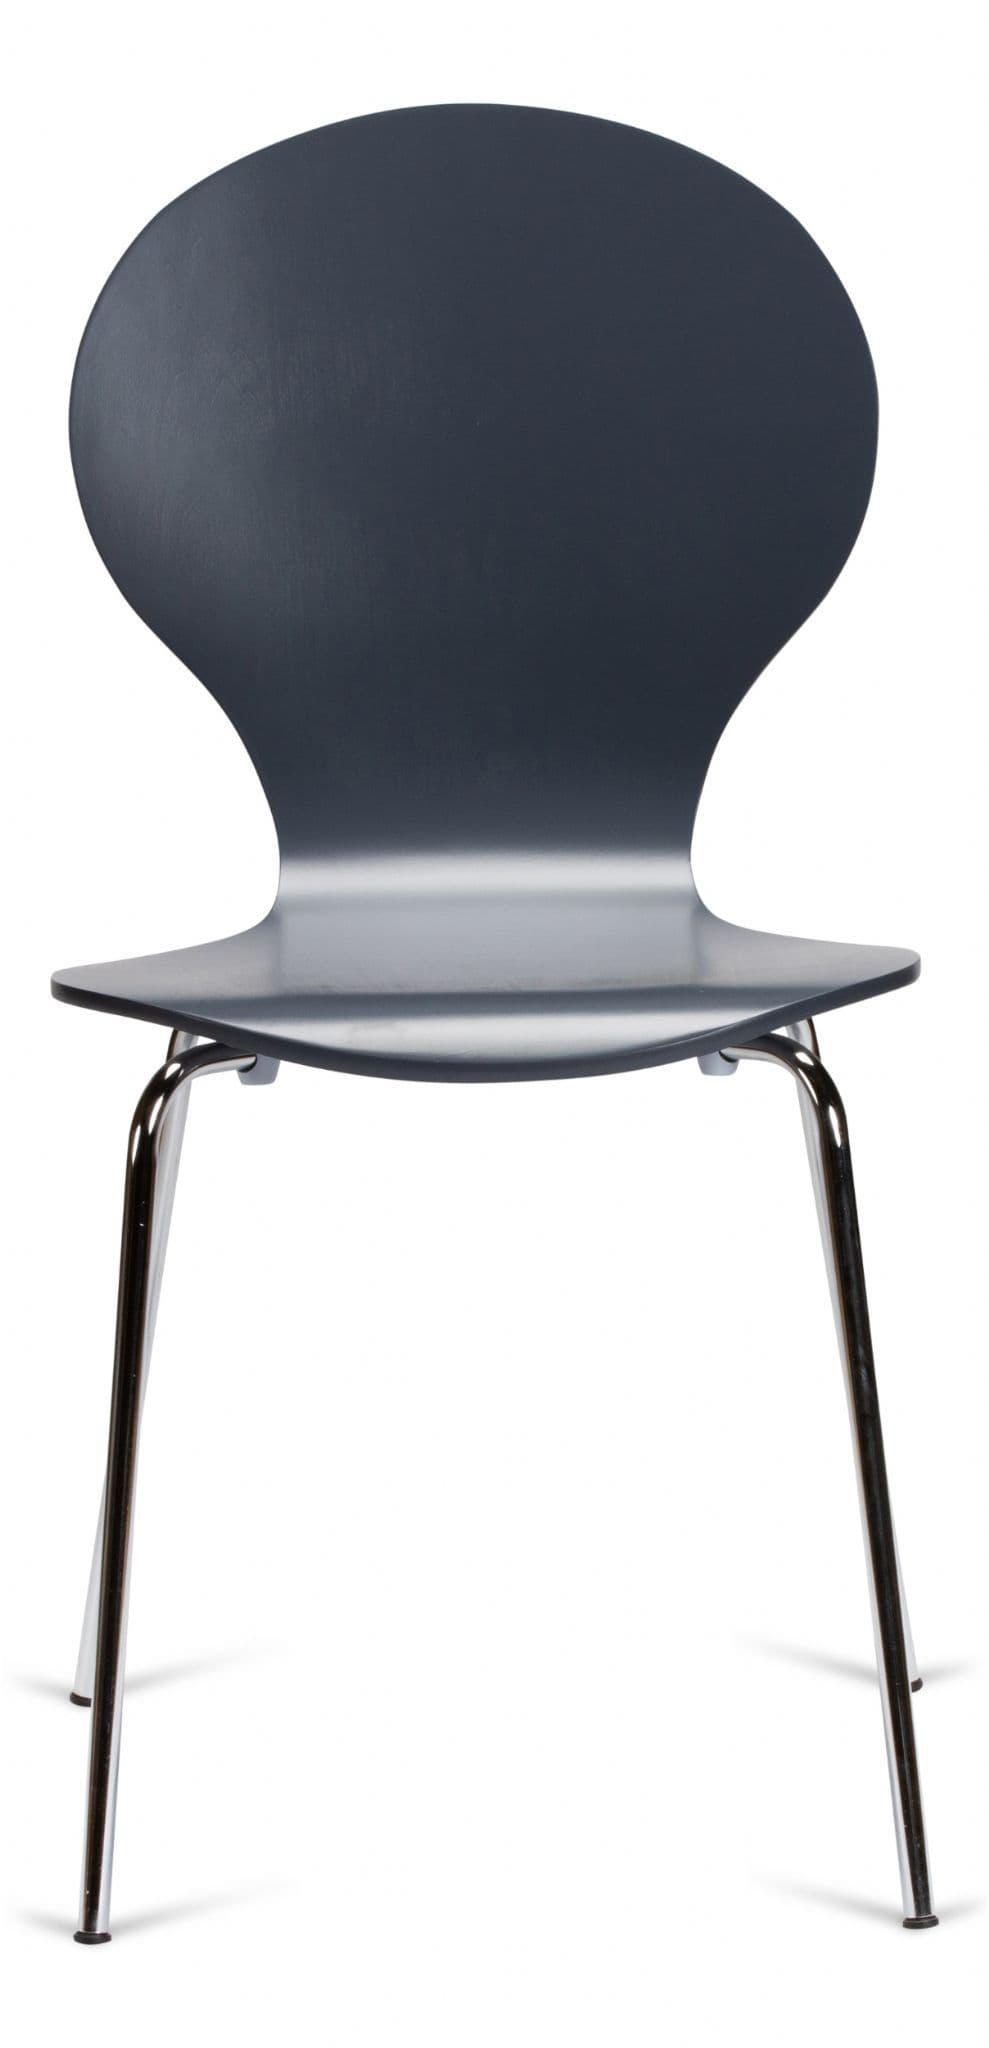 Kimberley Slate Grey & Chrome Dining Chairs Front View